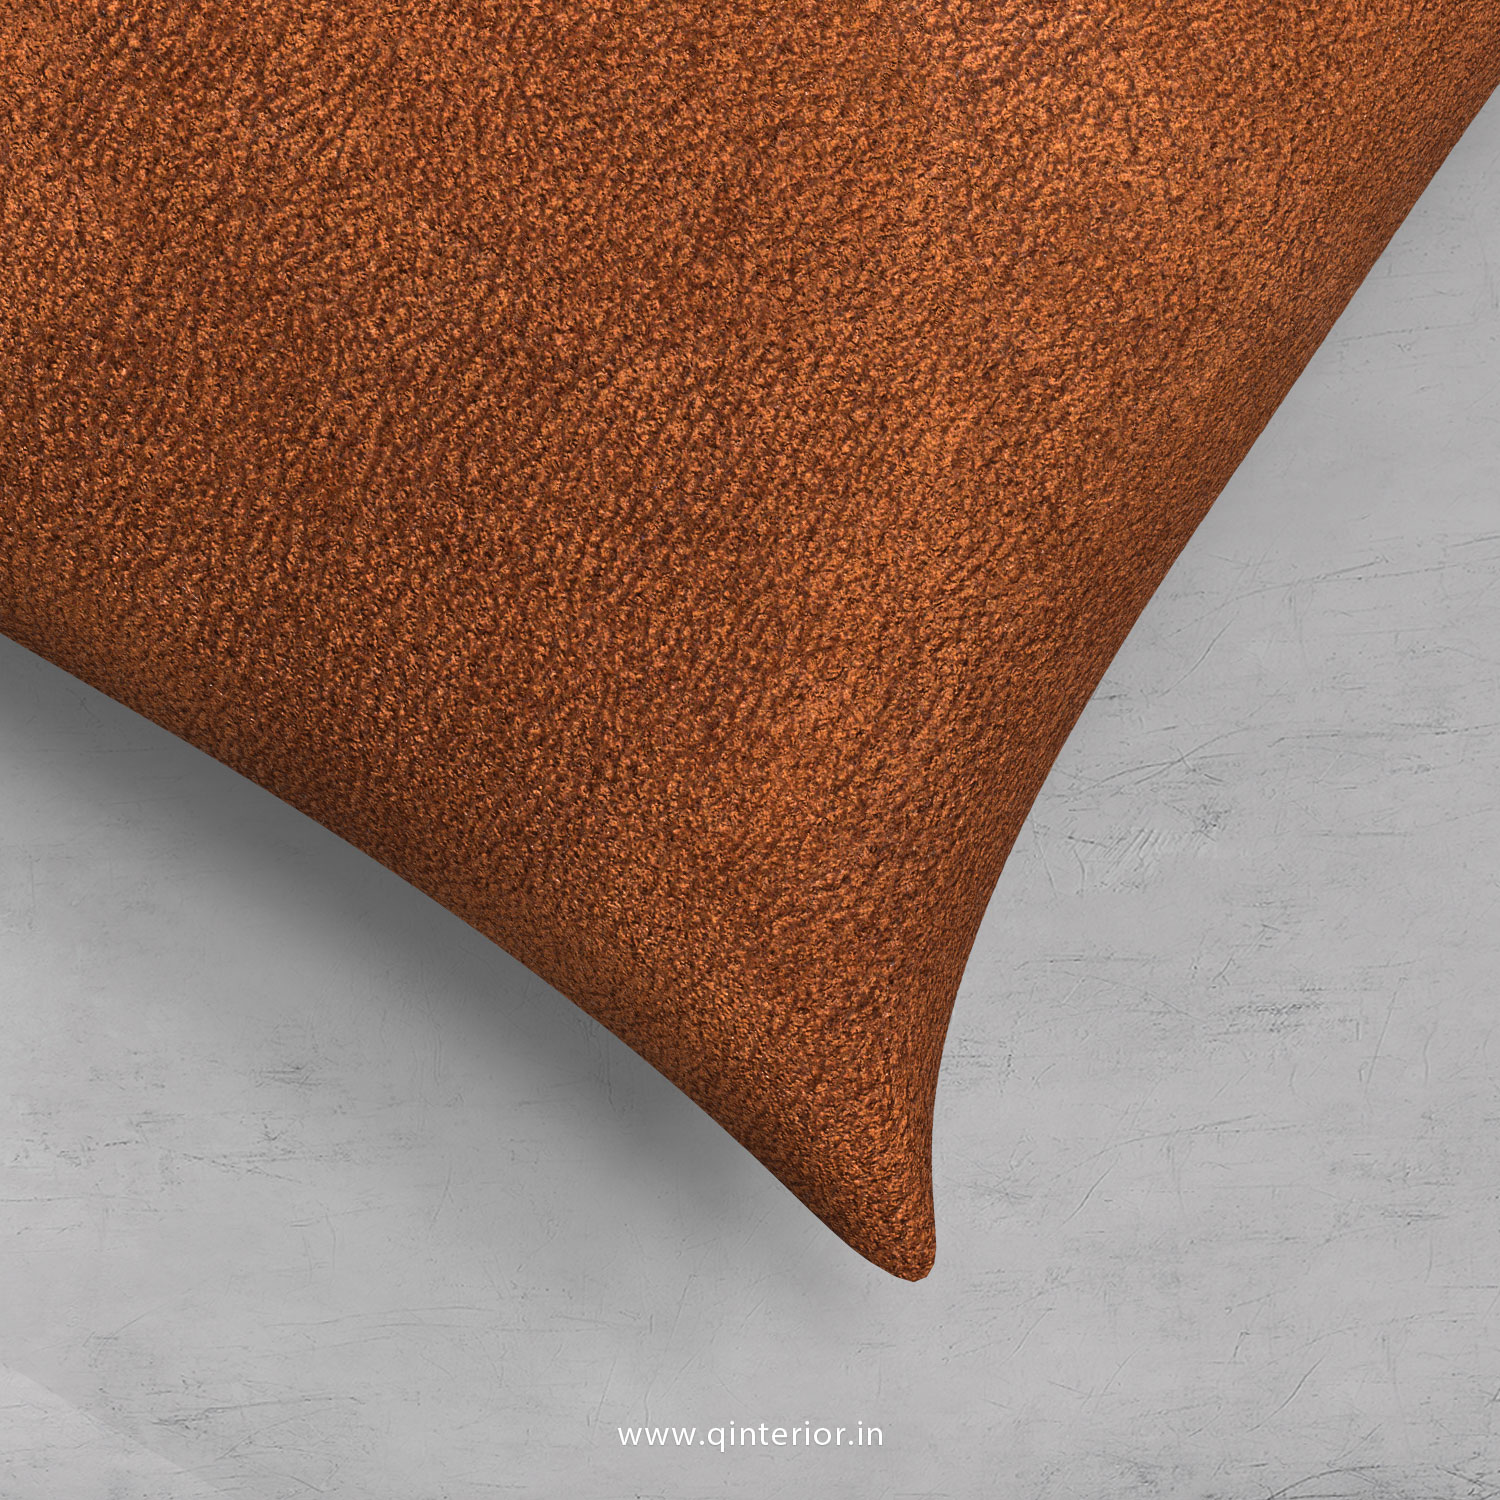 Cushion With Cushion Cover in Fab Leather- CUS002 FL14